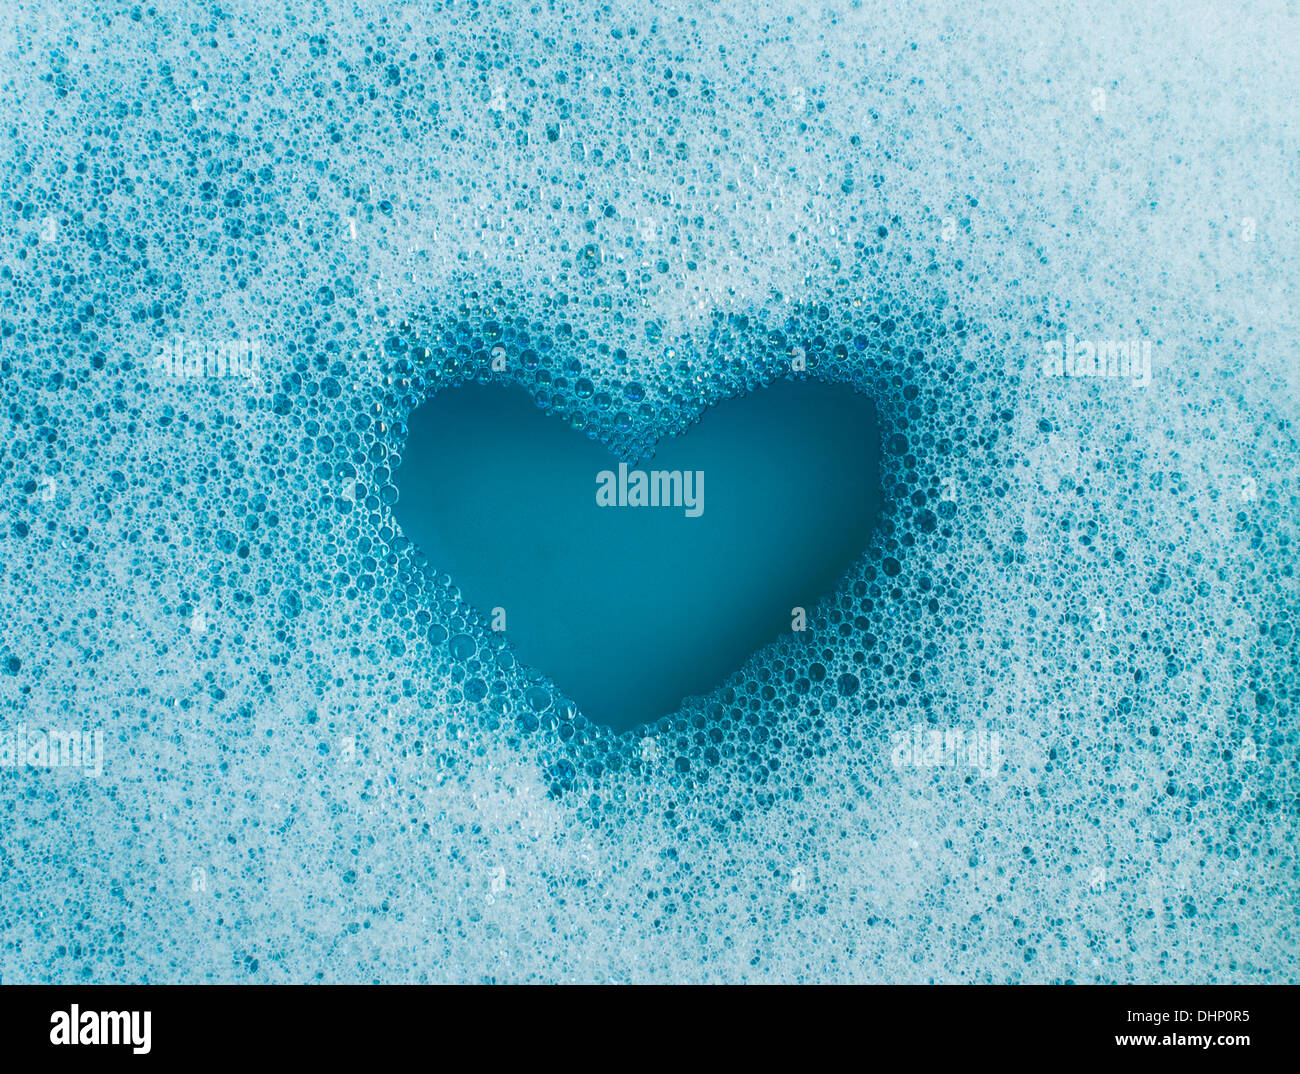 Heart shape created out of soap suds Stock Photo